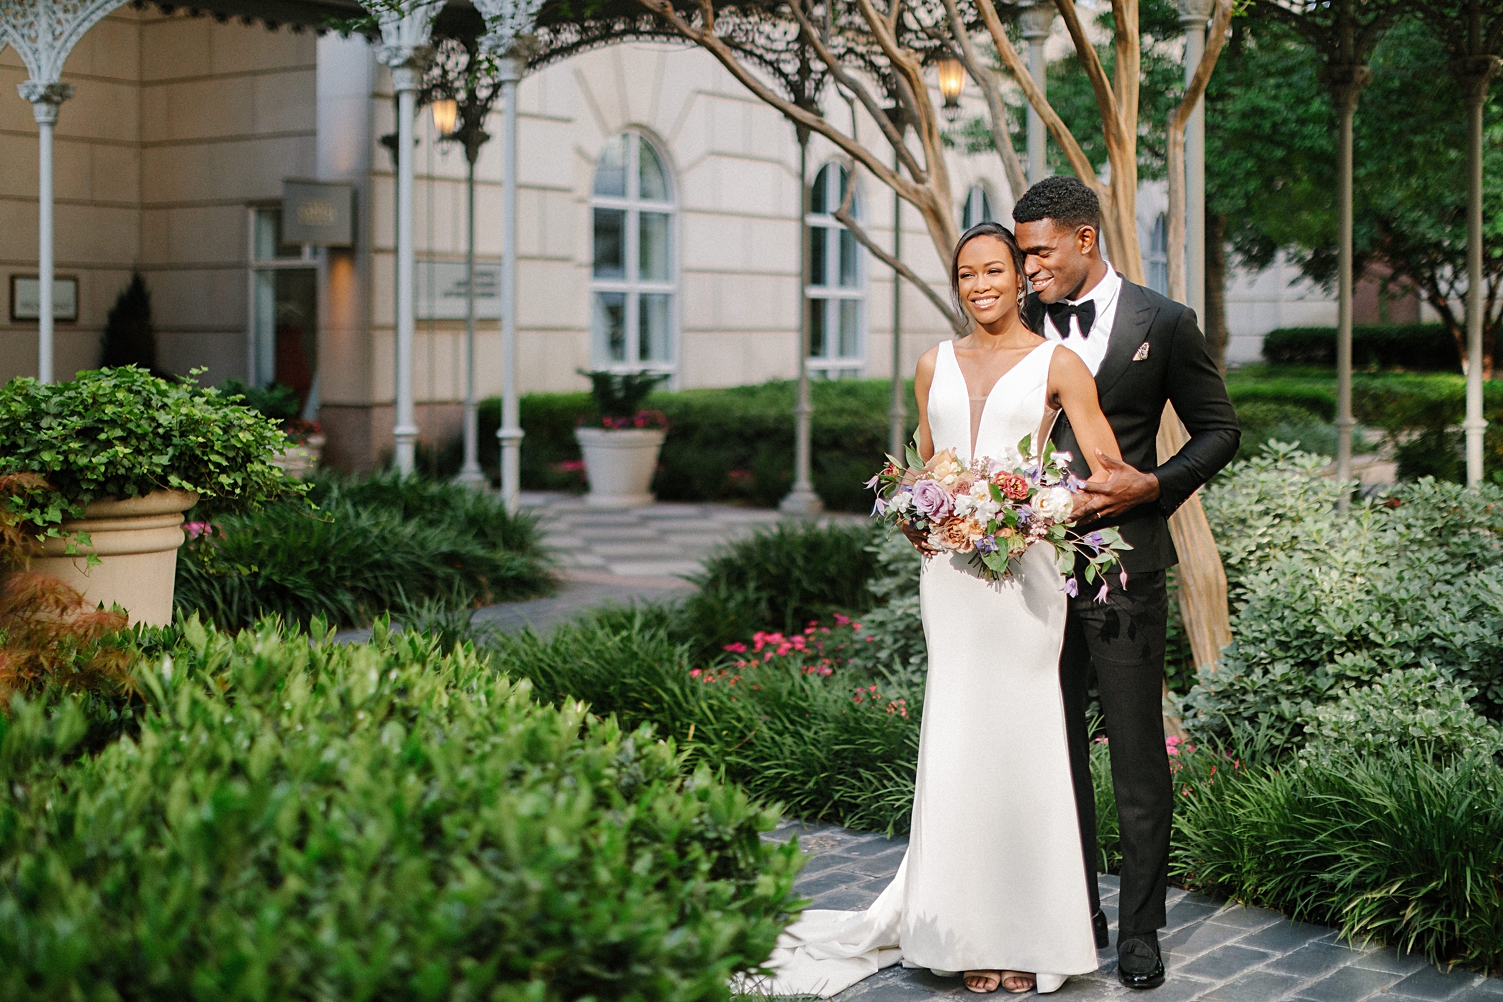 Hotel crescent court dallas wedding couple standing in courtyard